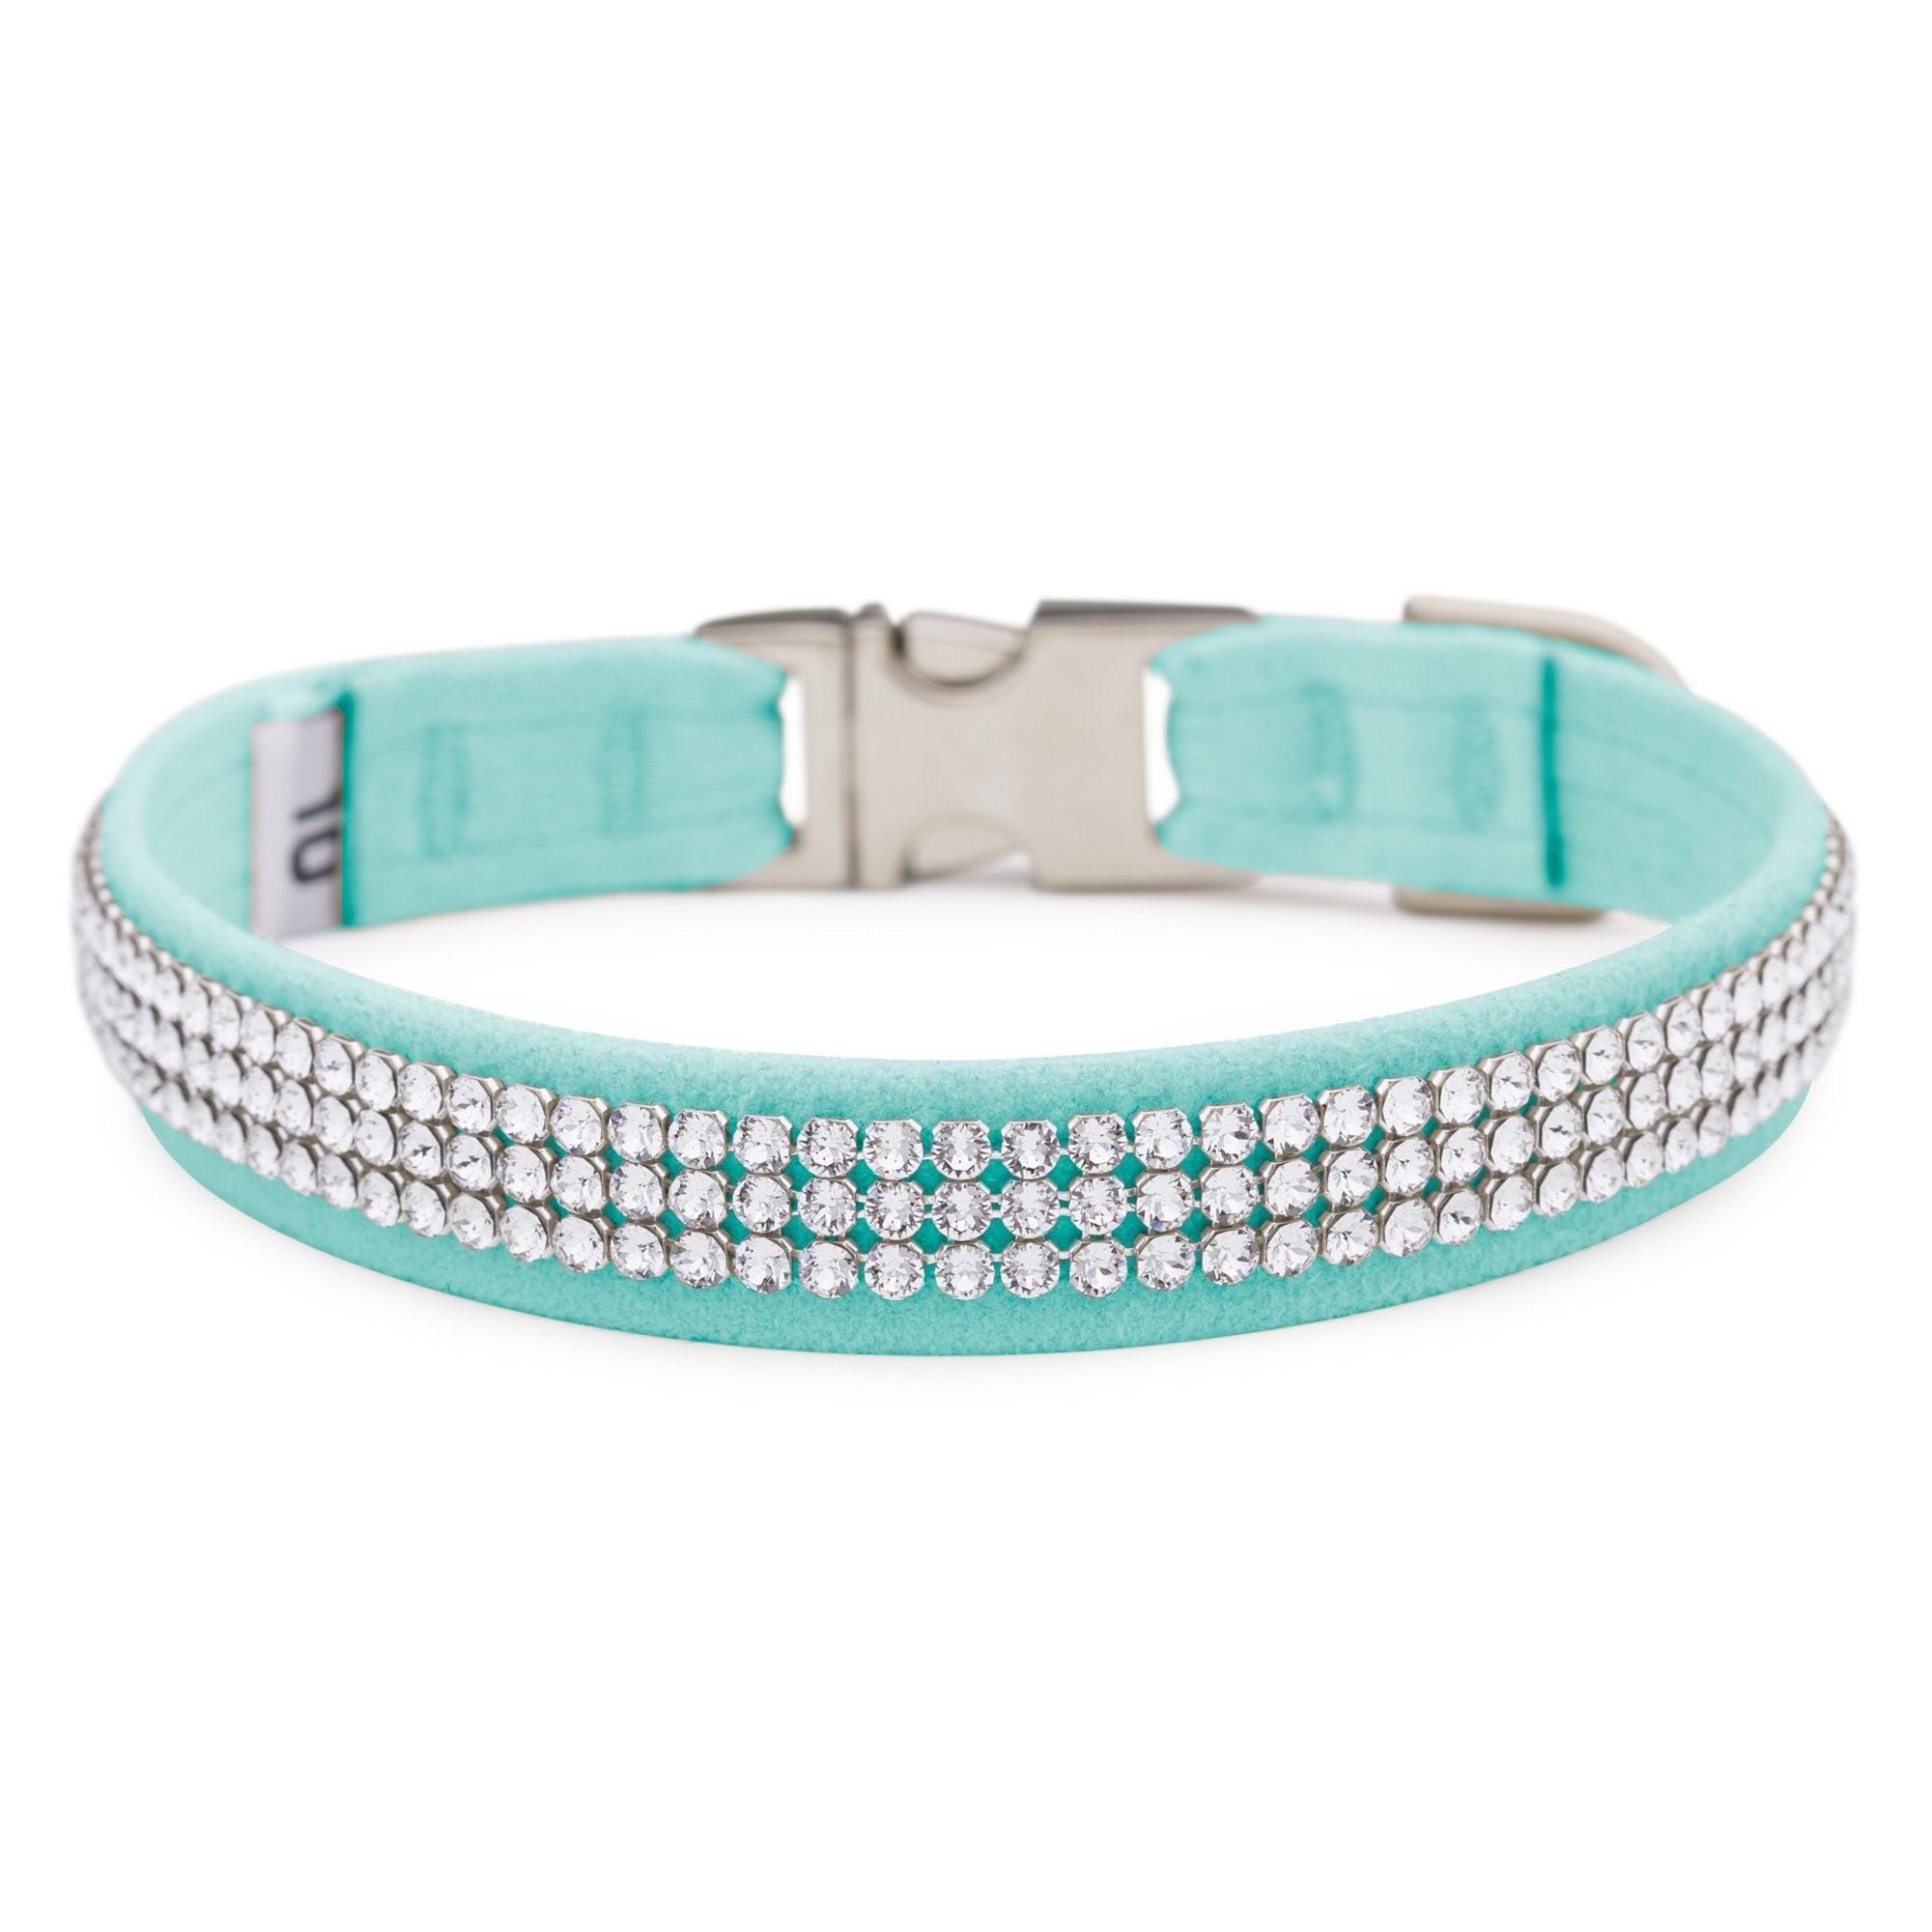 Tiffi Blue 3 Row Giltmore Perfect Fit Collar - Rocky & Maggie's Pet Boutique and Salon